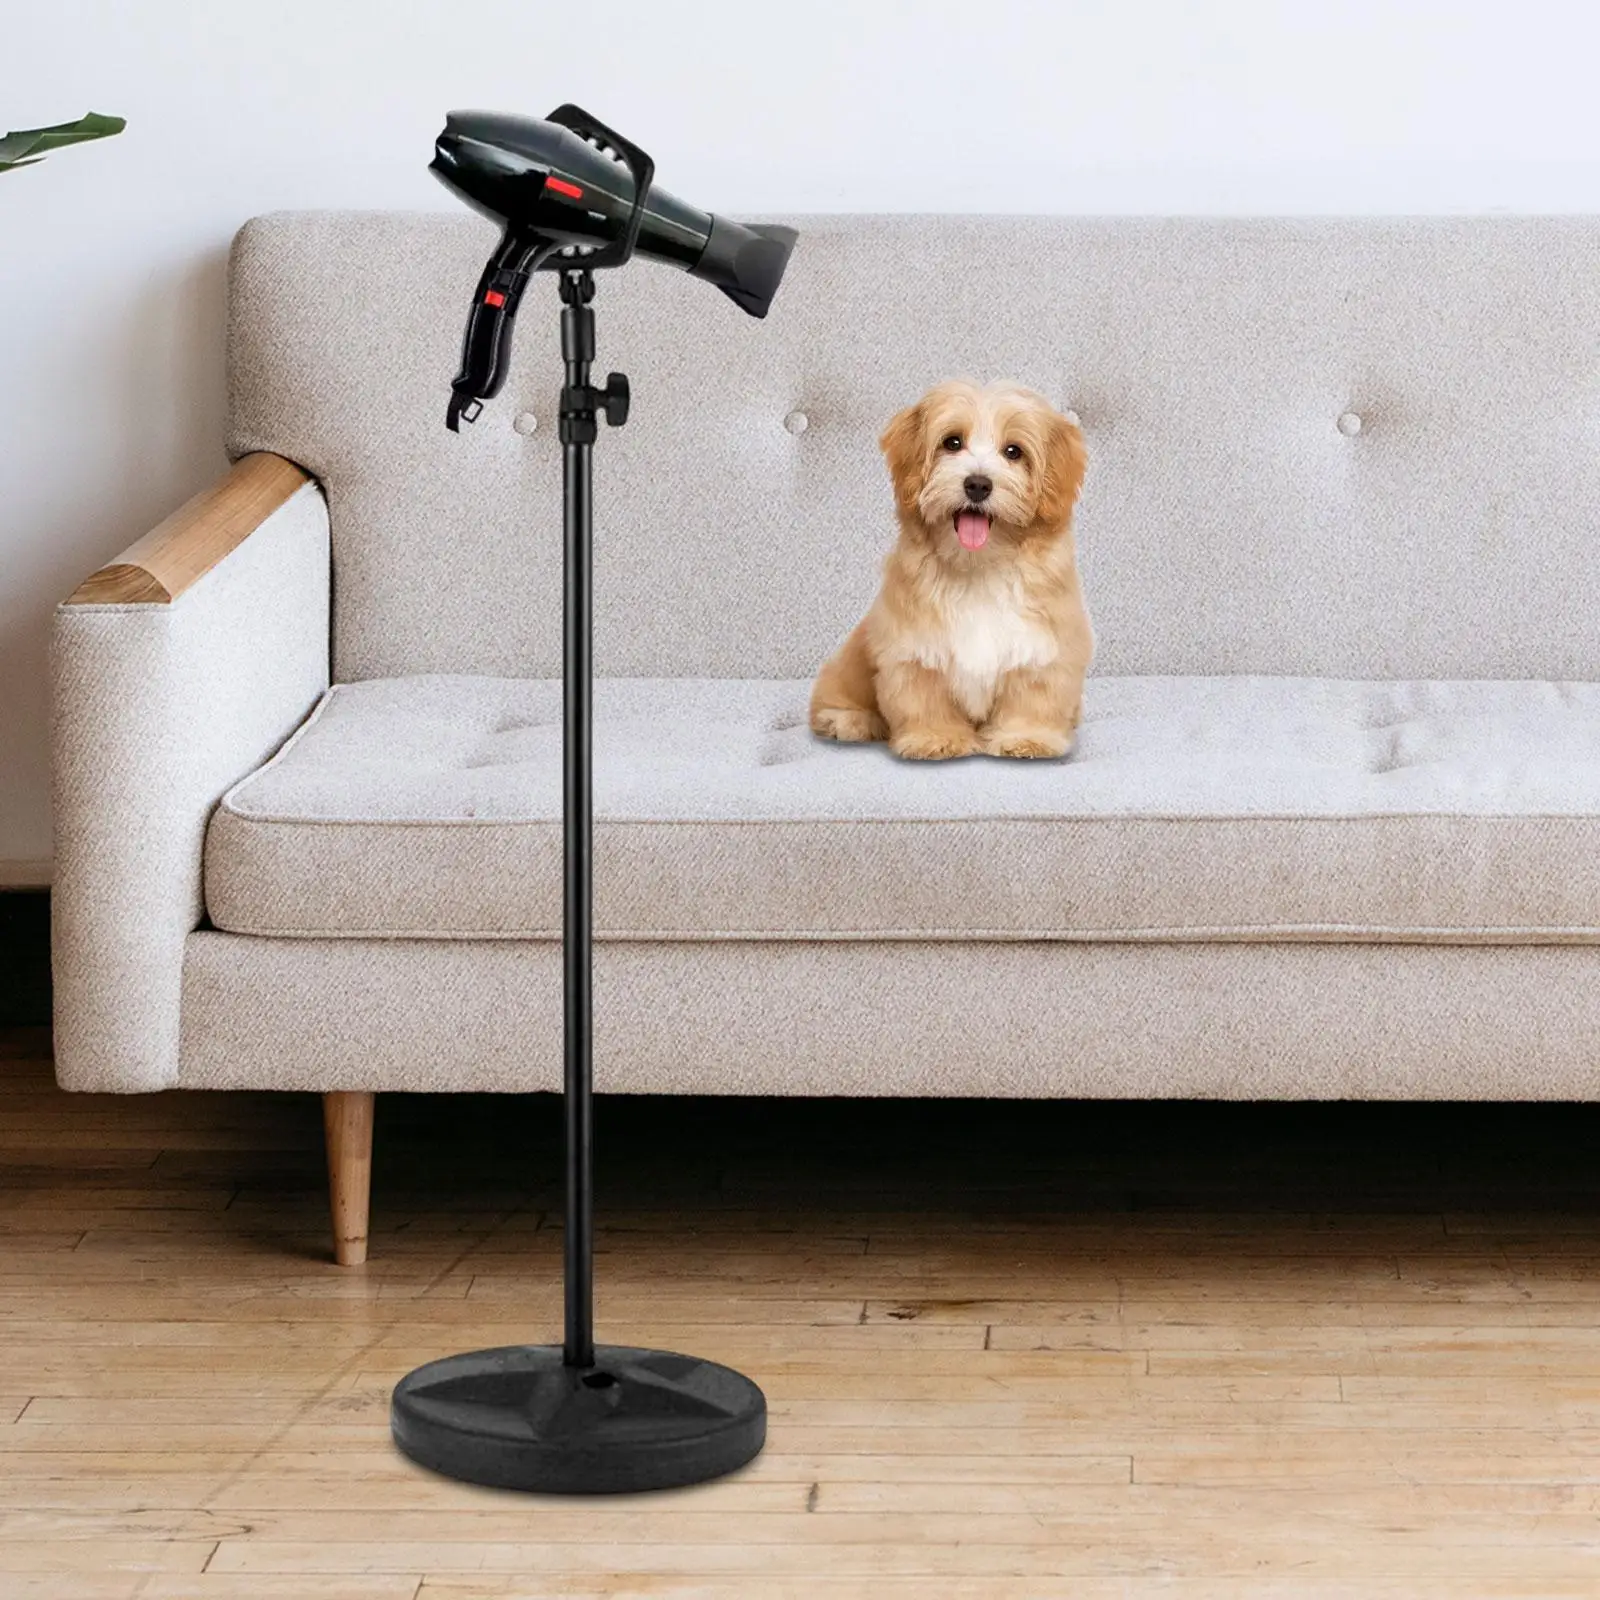 Lazy Hair Dryer Stand Holder Phone Holder 180 Degrees Rotating Adjustable Standing Hair Dryer for Dog Grooming Groomers Tools